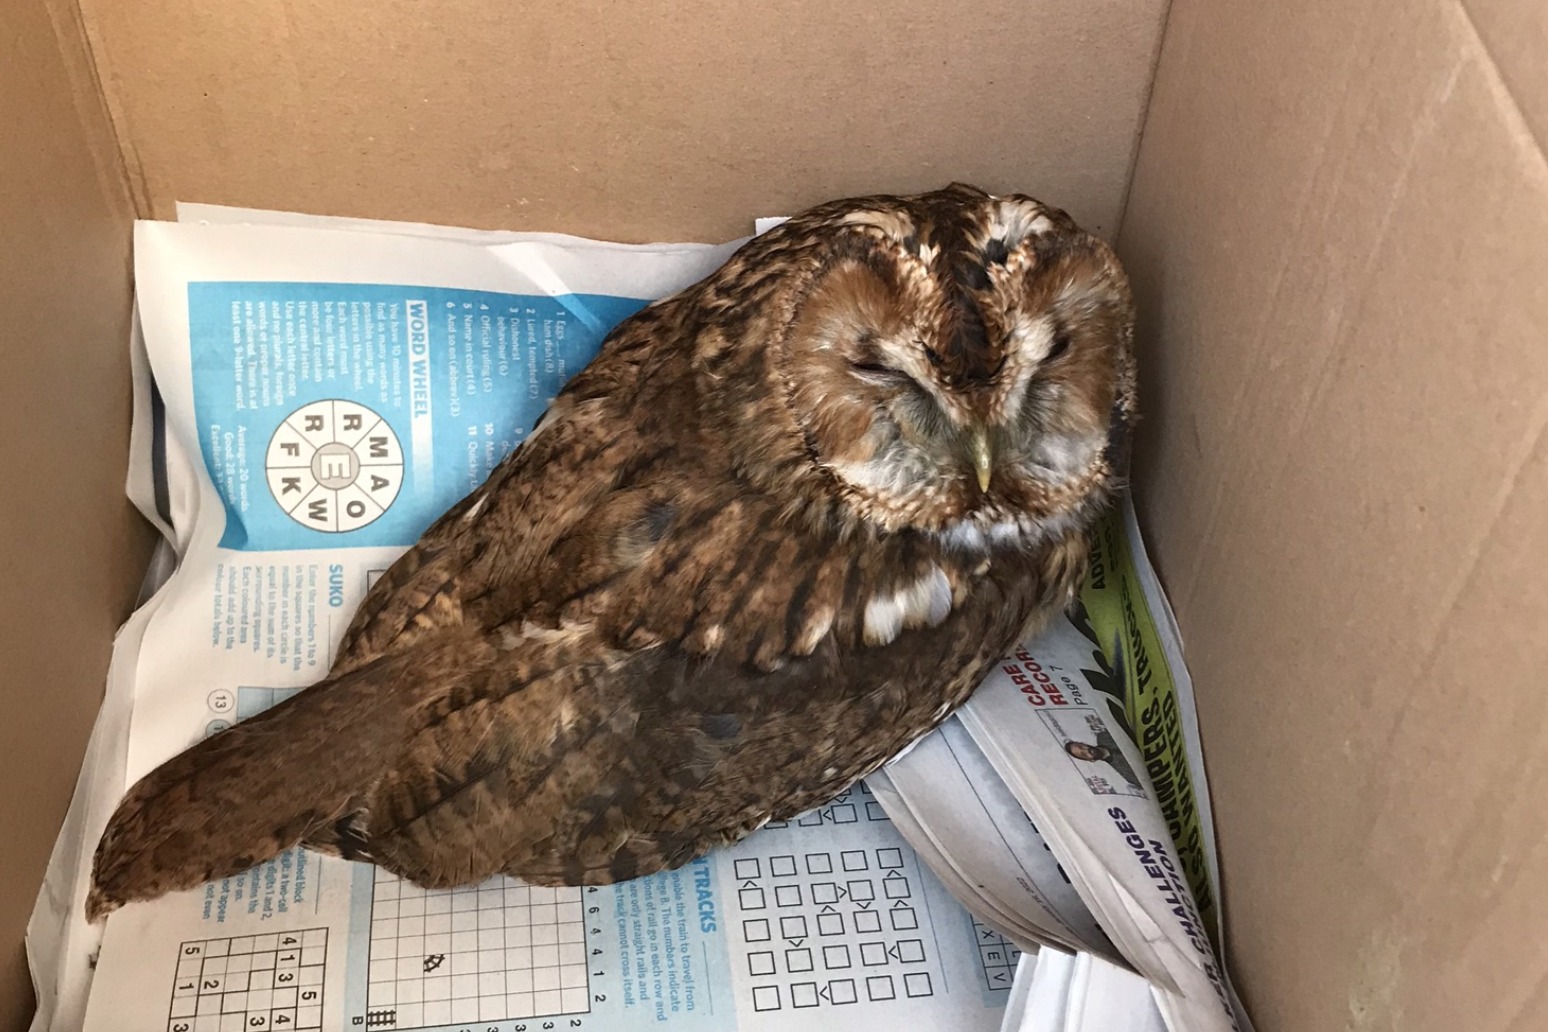 Tawny owl will live to fly another night after encounter with pond netting